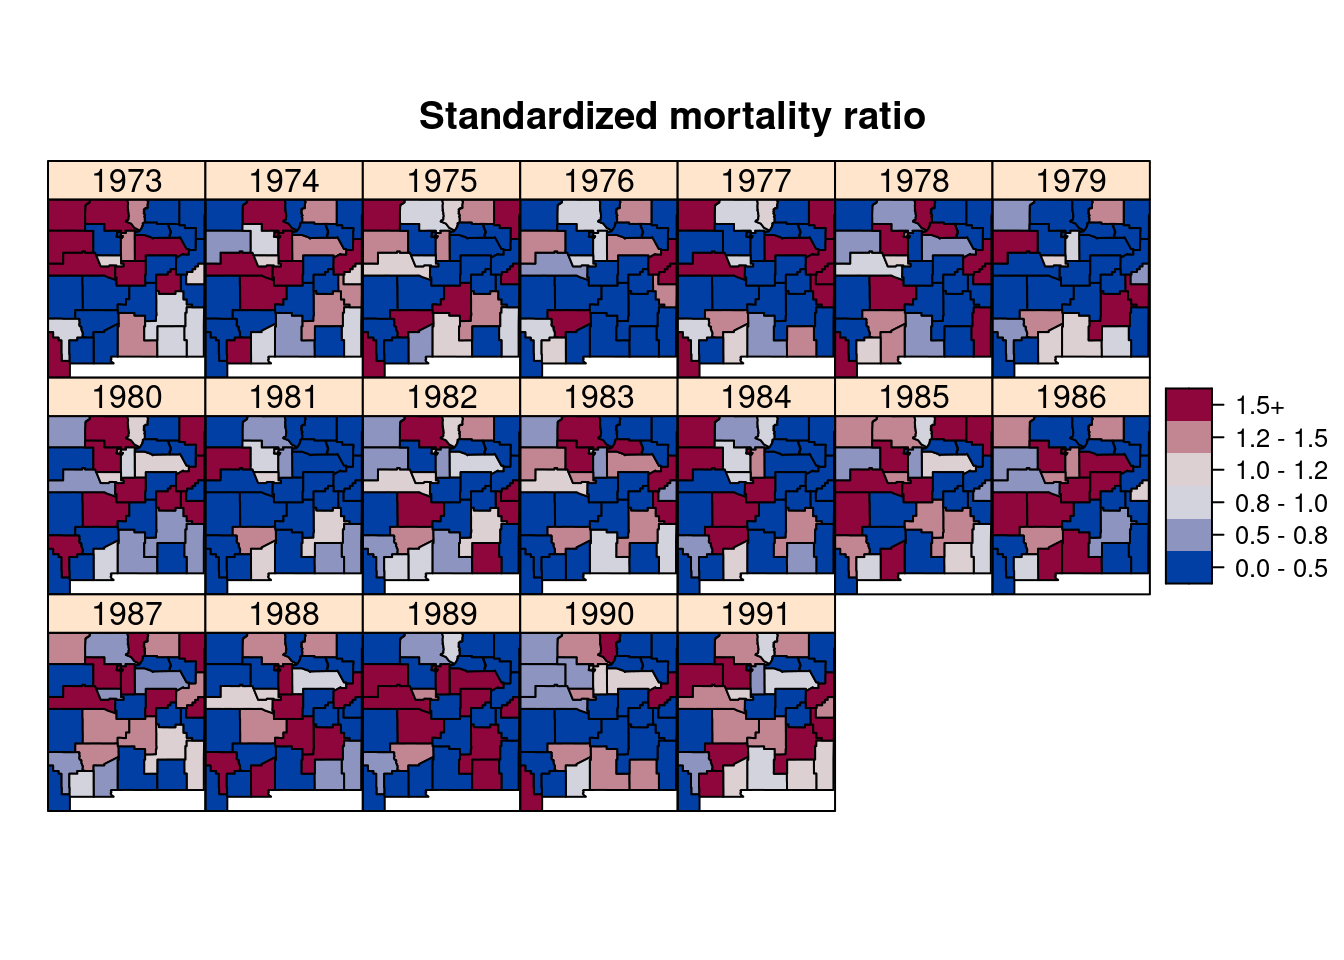 Standardized Mortality Ratio (SMR) of brain cancer in New Mexico from 1973 to 1991.